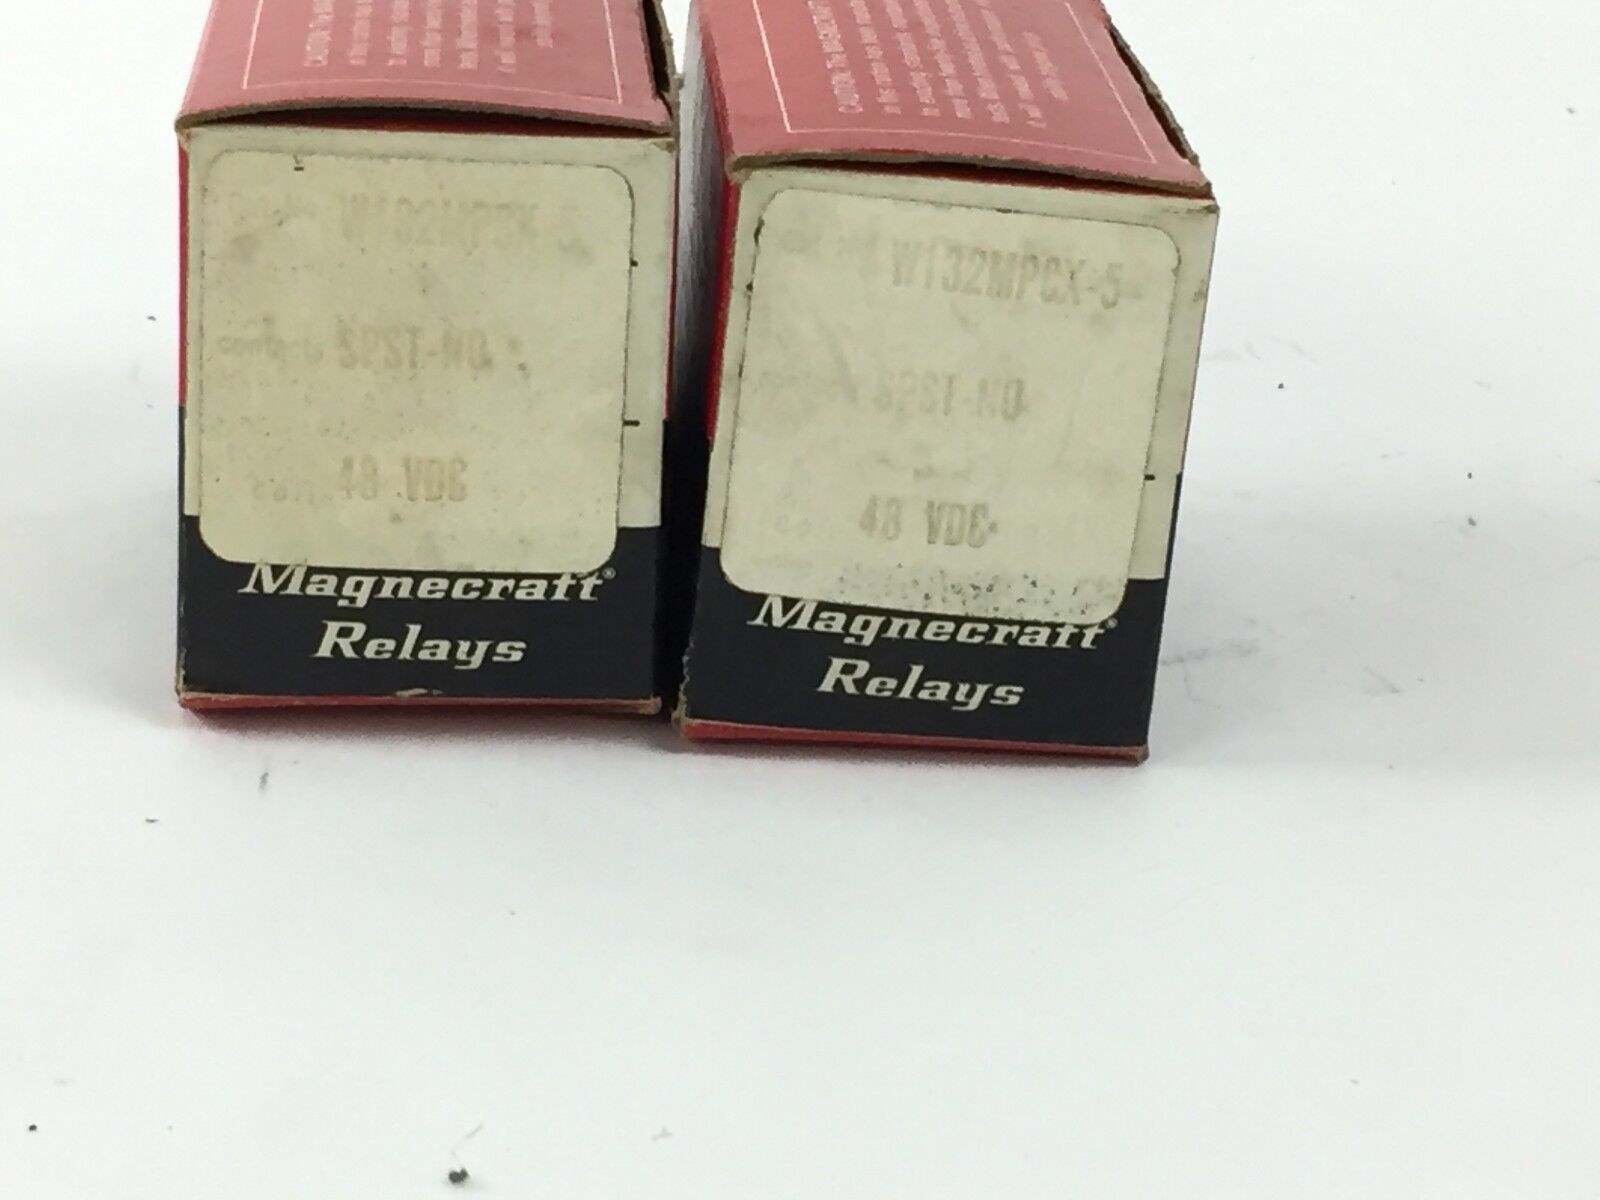 Magnecraft W132MPCX-5 400 Ohm 48VDC Contact Relay Lot of 2